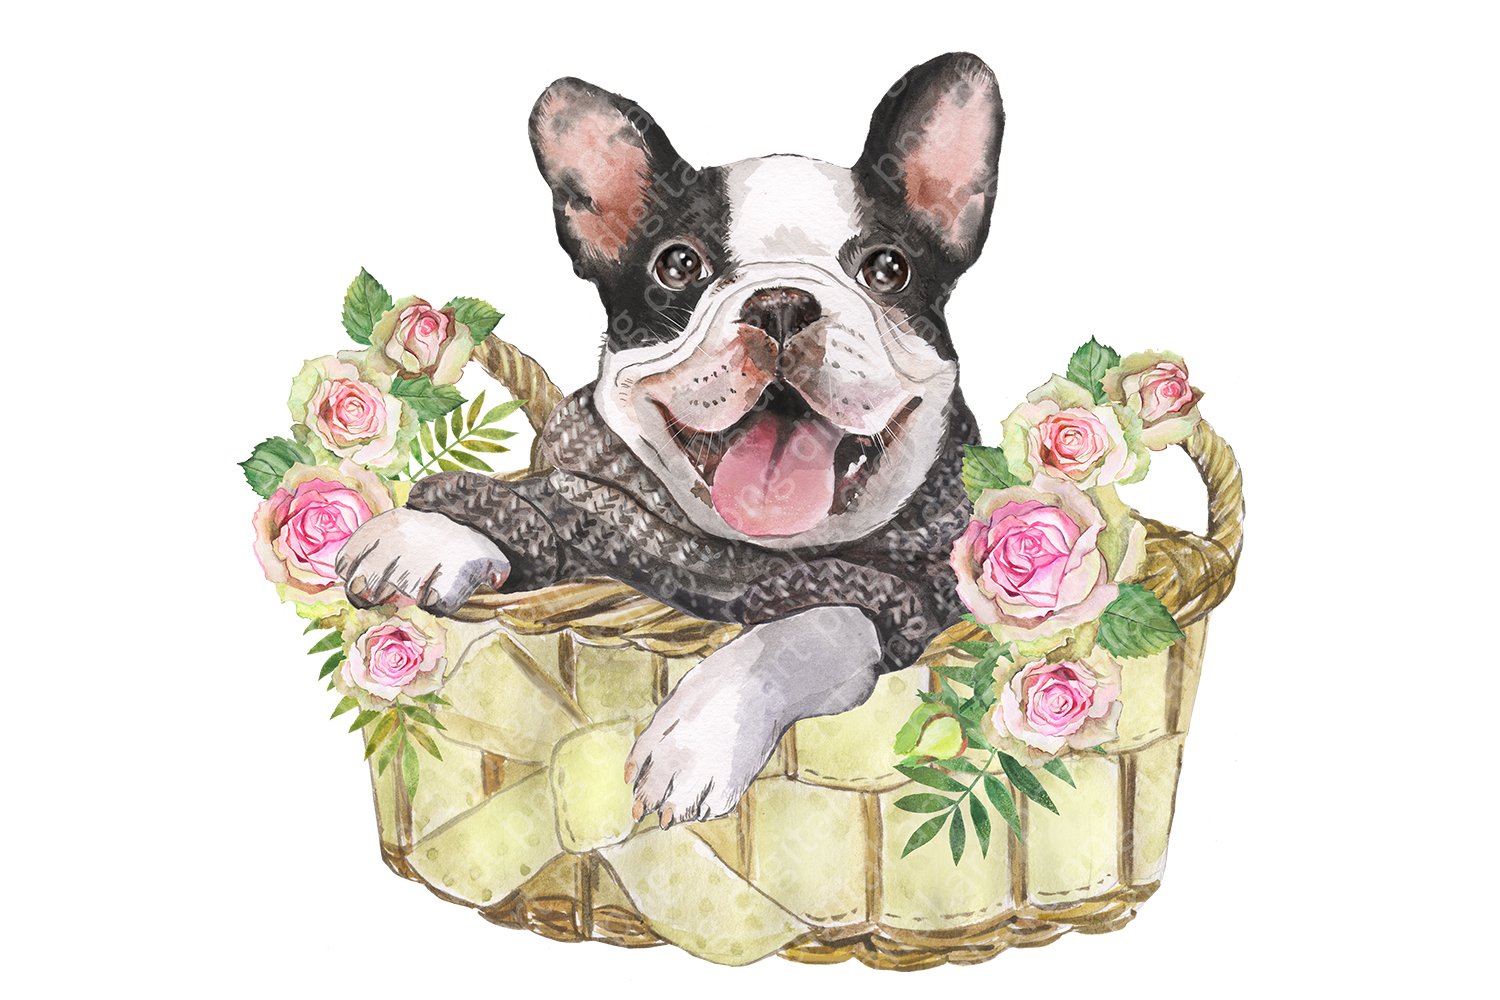 Dog is sitting in a basket with flowers.